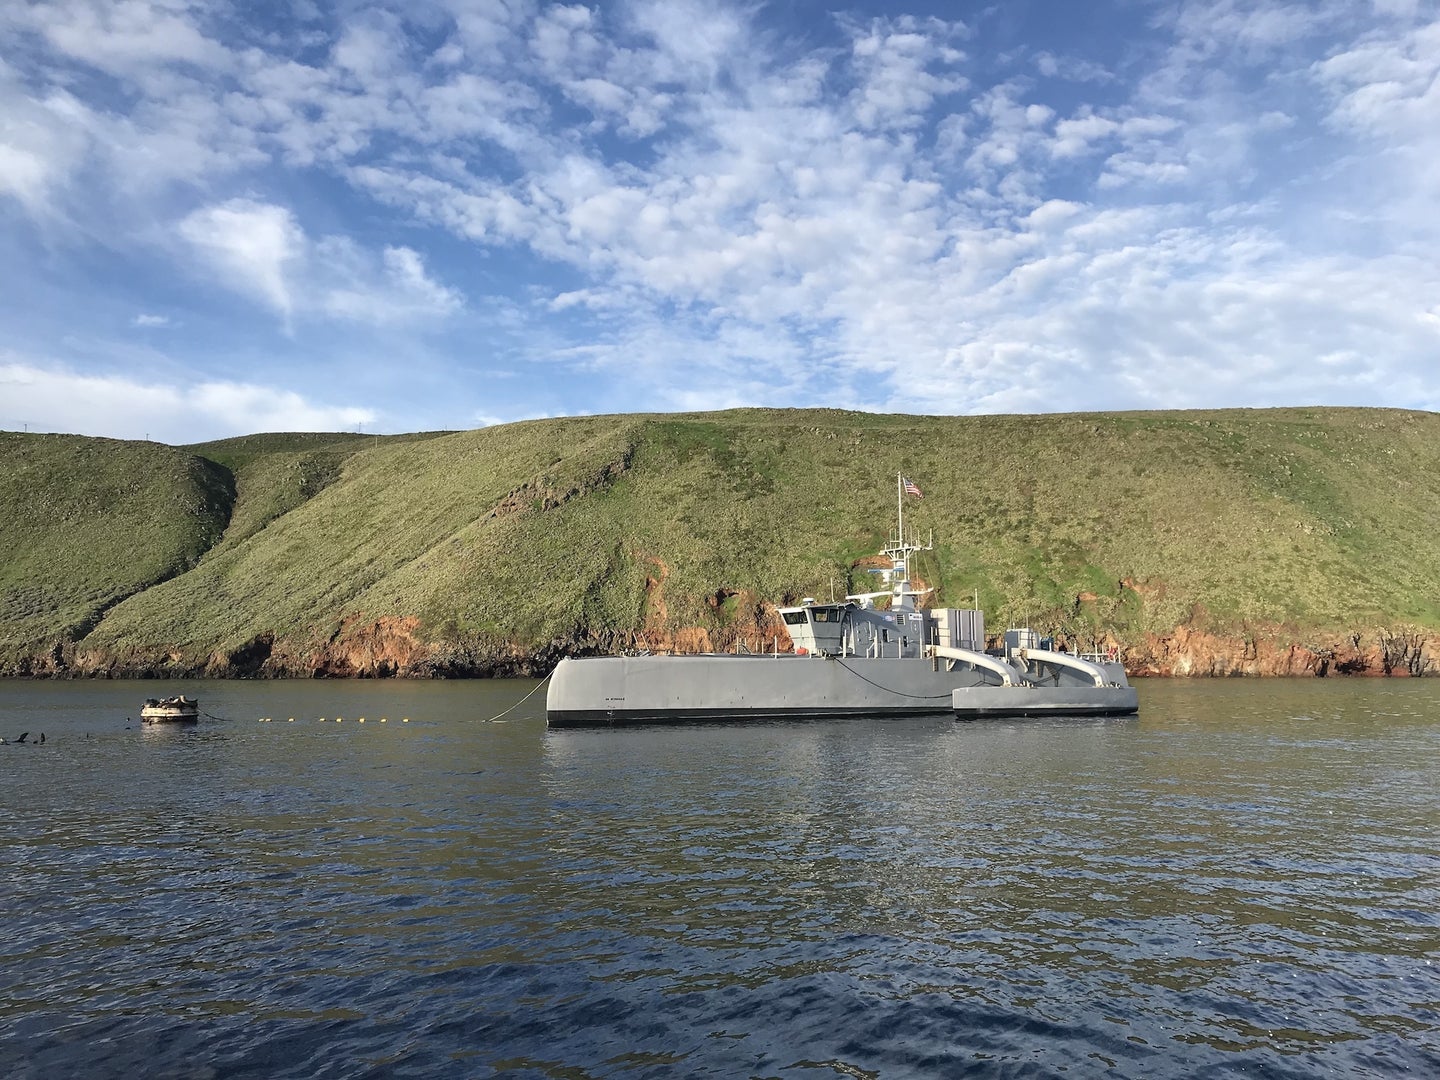 The Sea Hunter is an existing robotic ship, seen here in 2019.